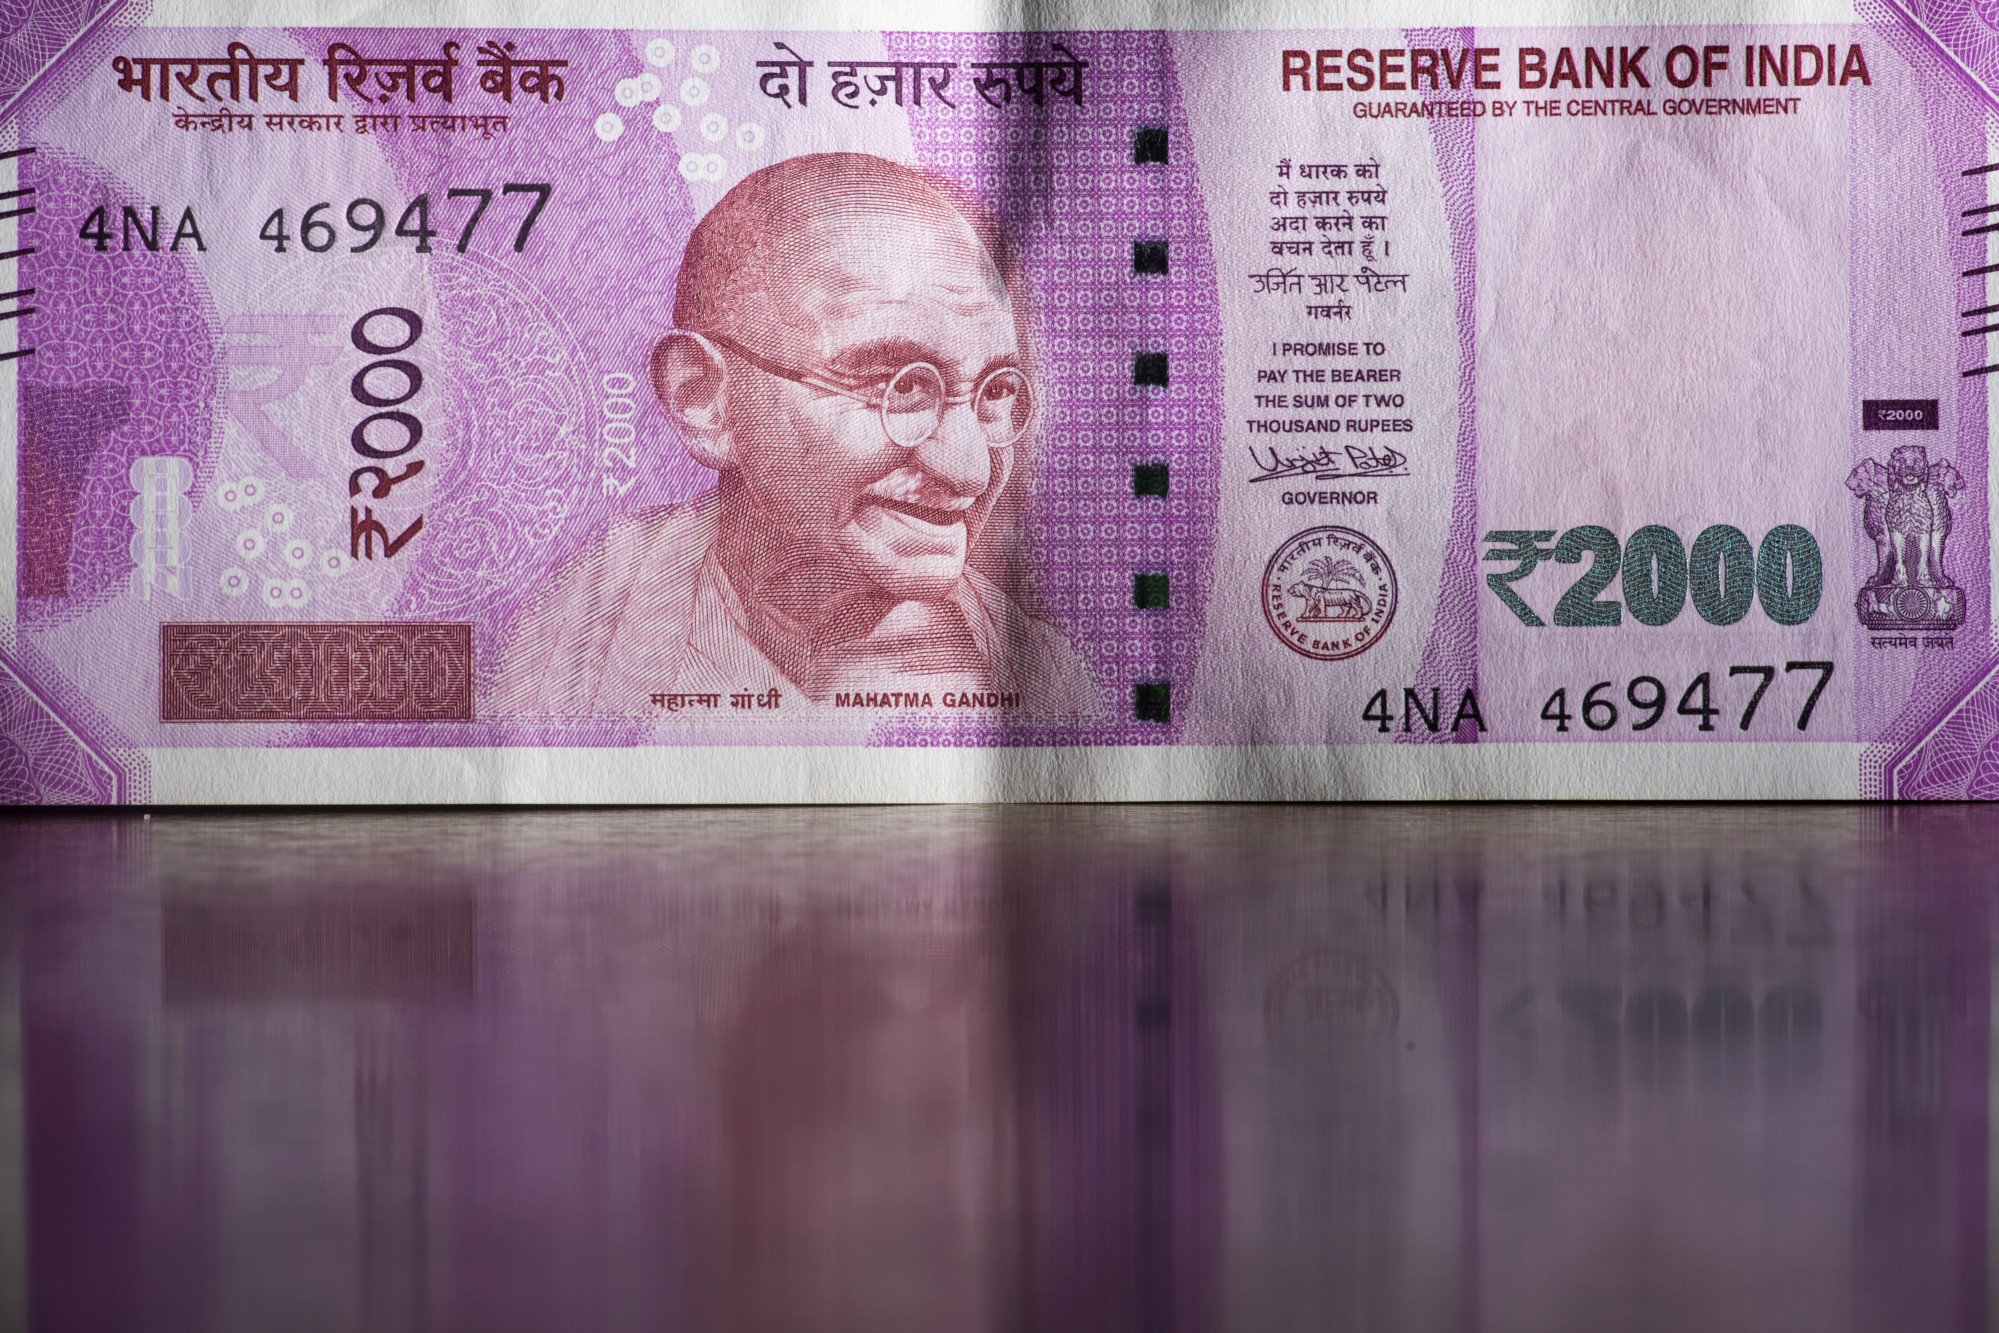 An Indian 2,000 rupee banknote